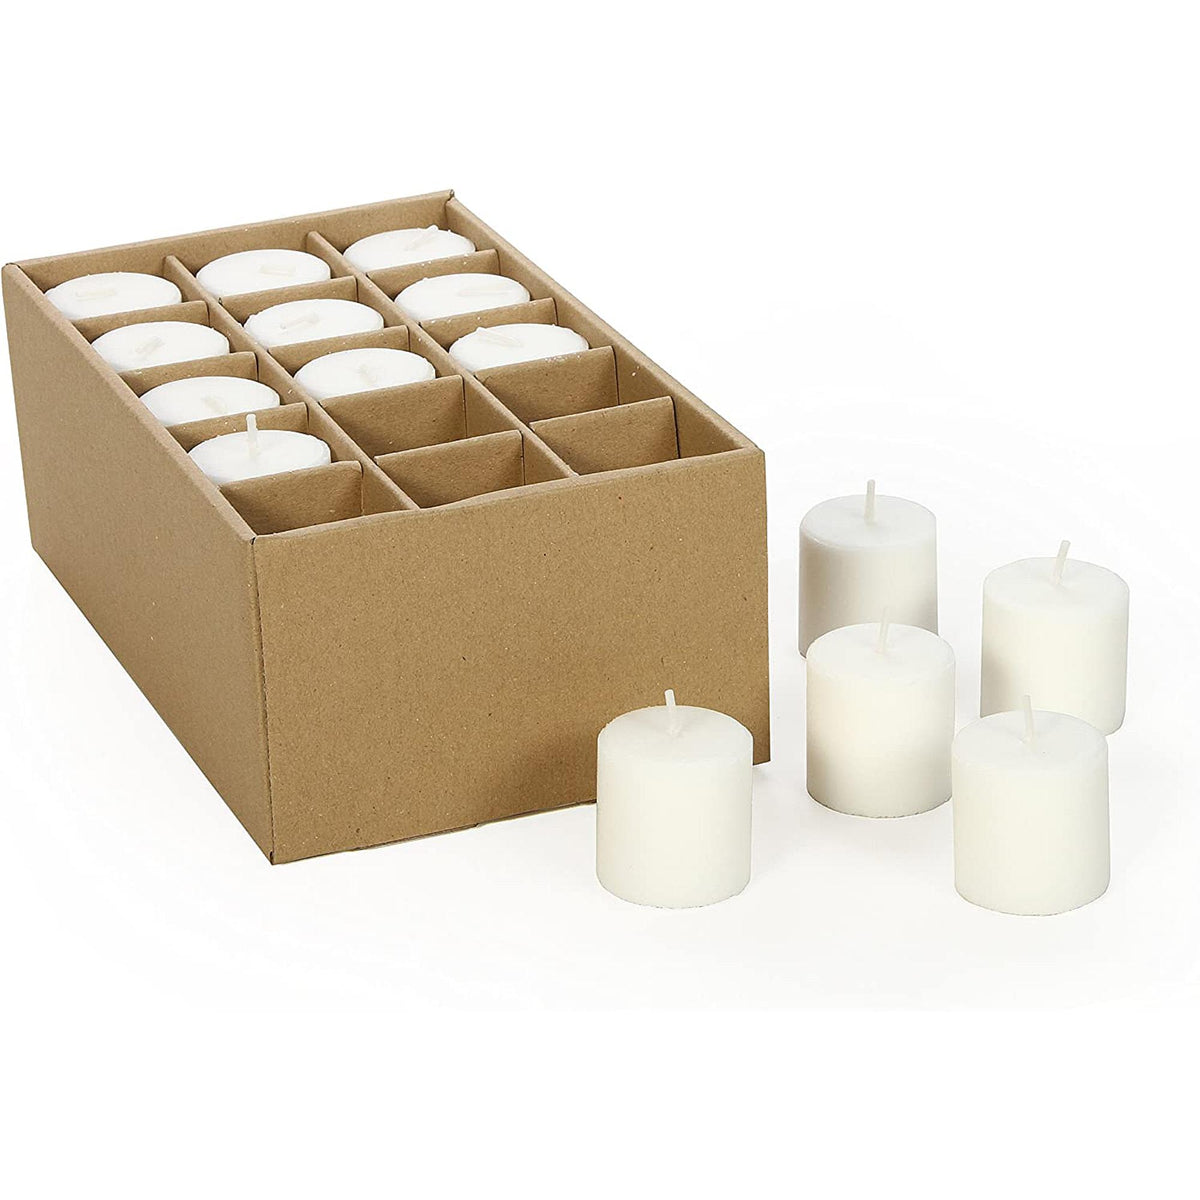 HOSLEY®  Unscented Votive Candles, White color, Set of 30